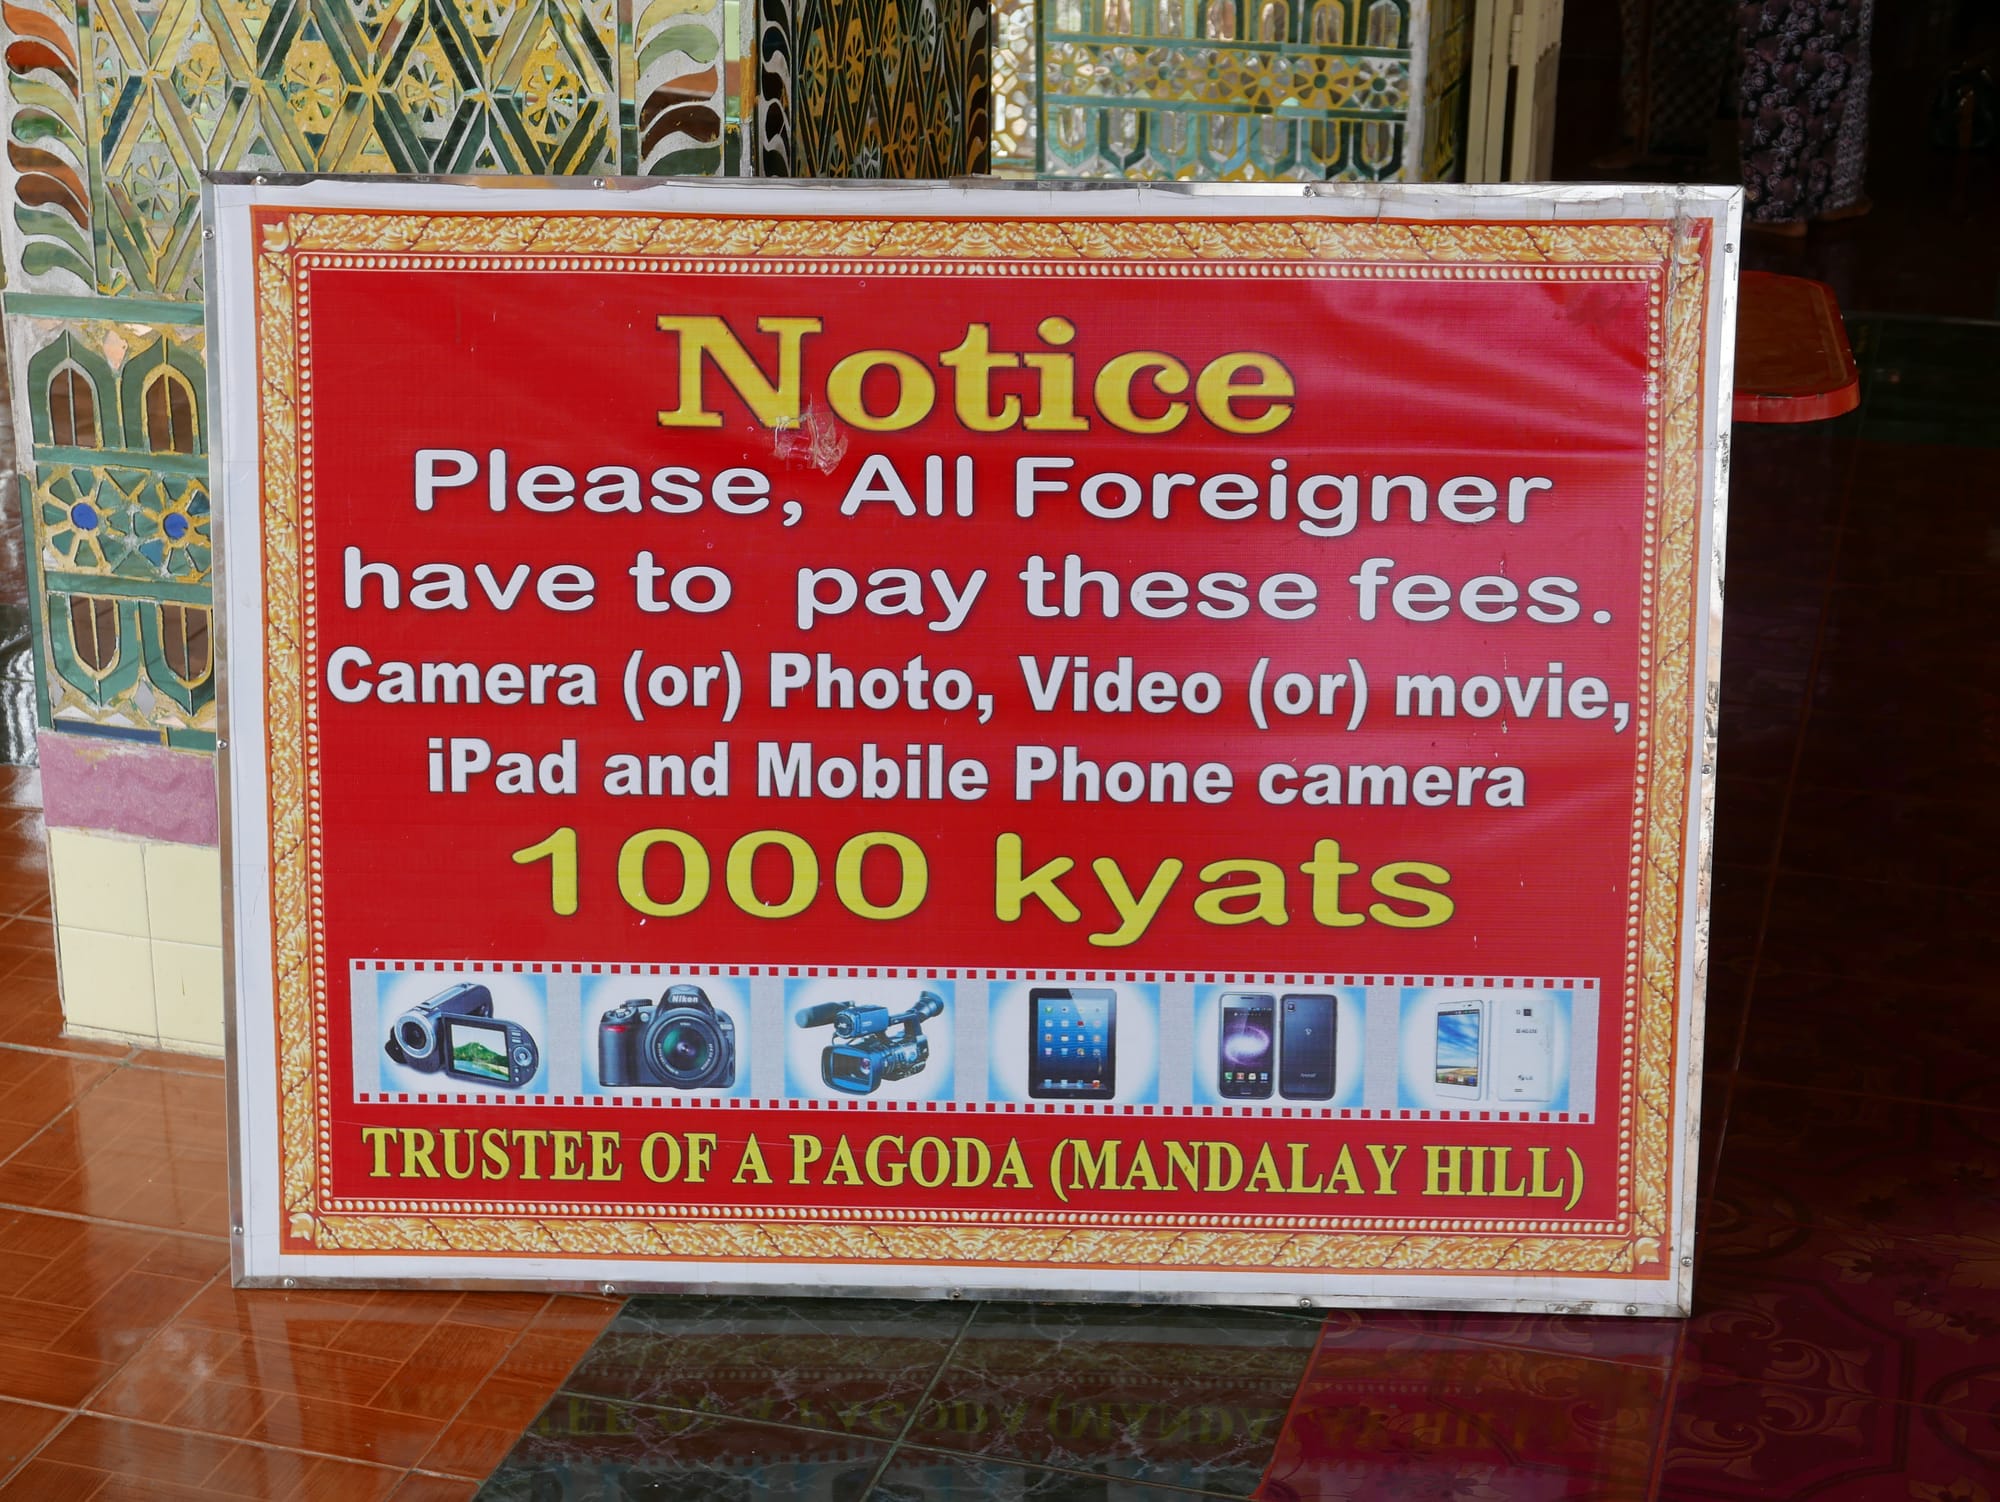 Photo by Author — photo charge for foreigners on Mandalay Hill